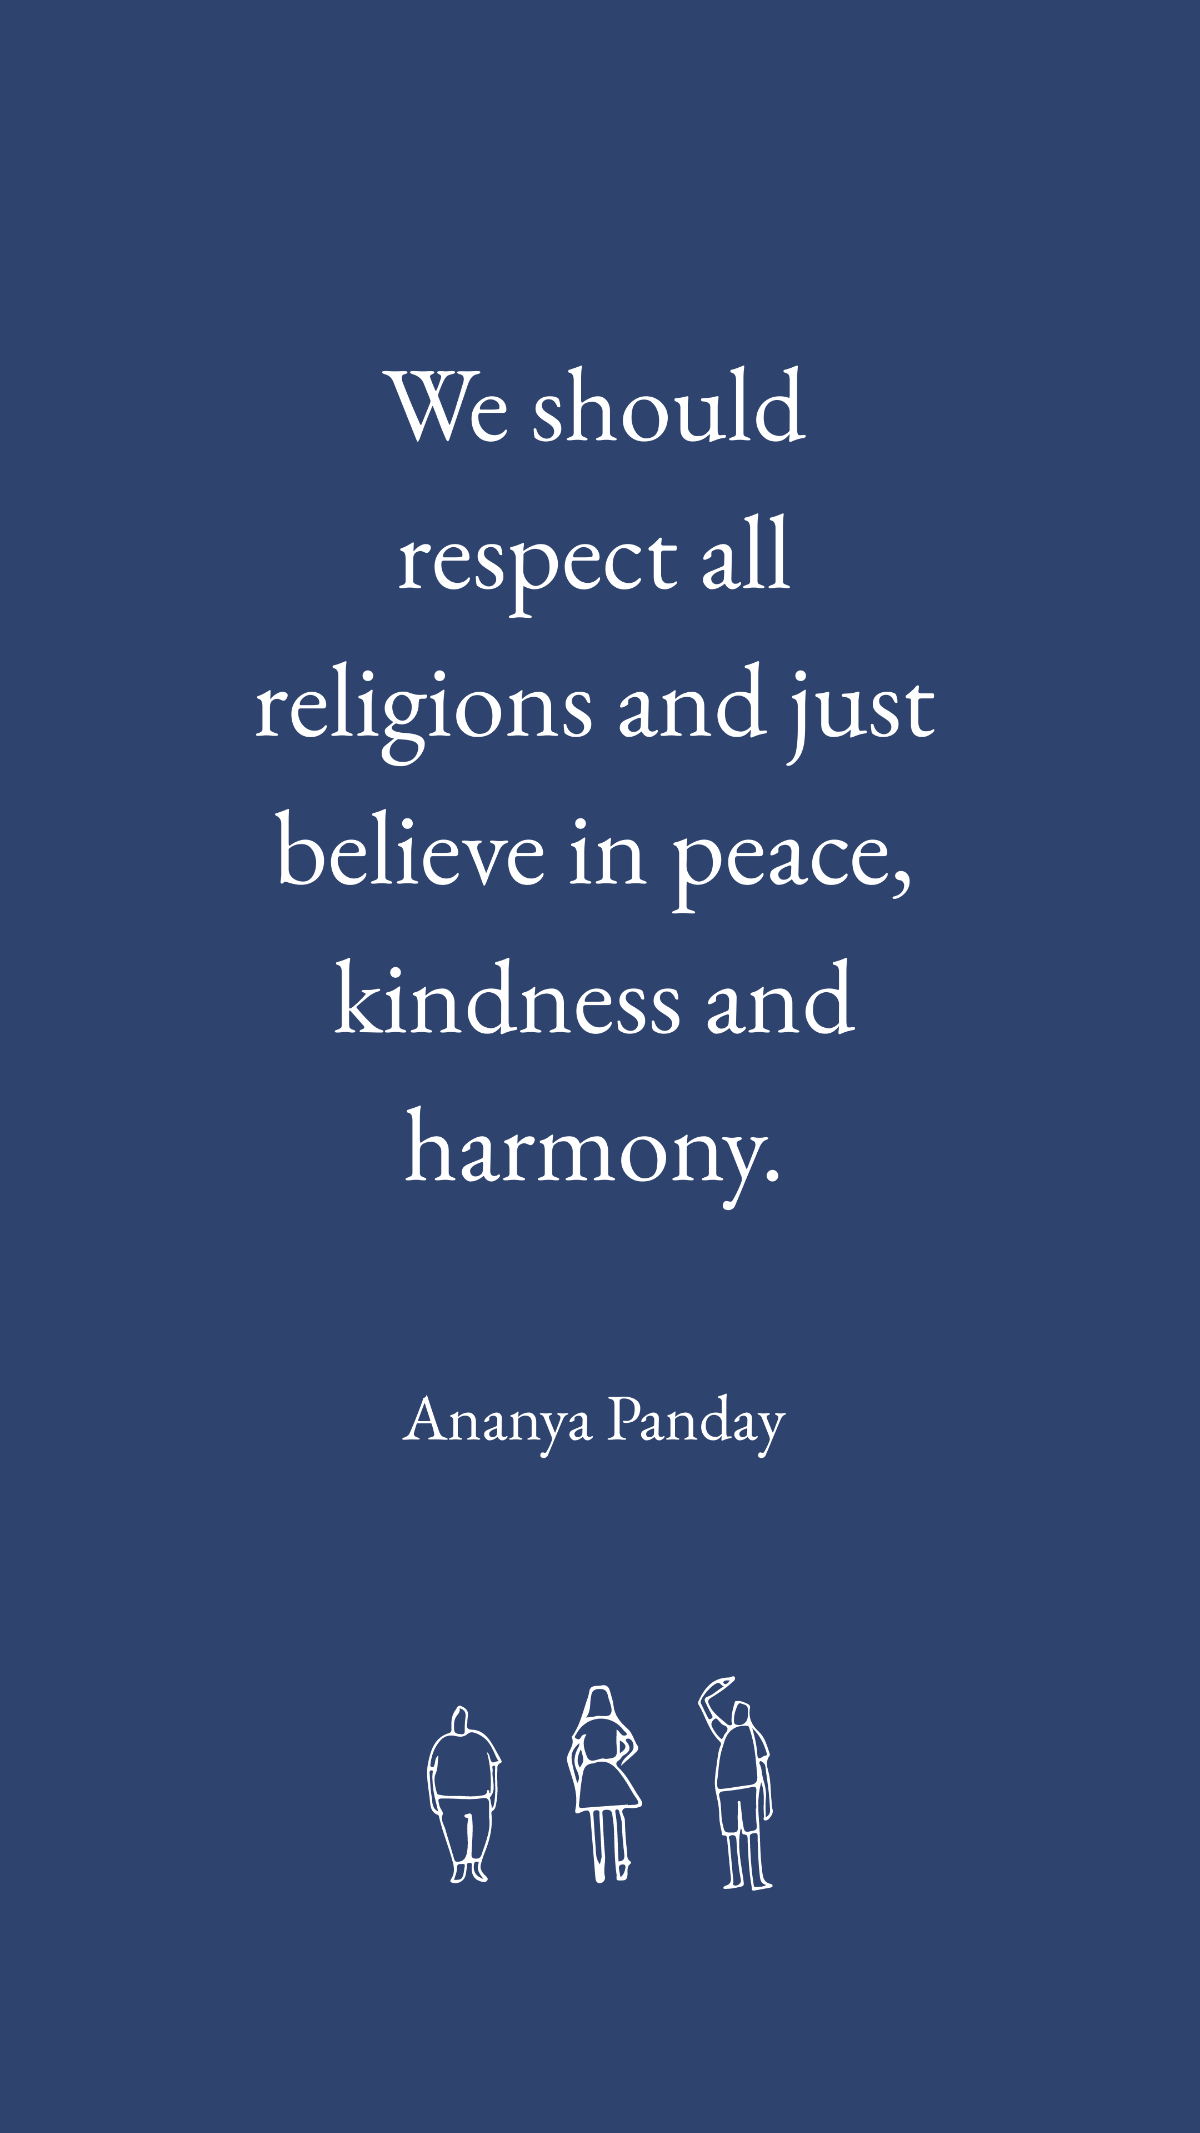 Free Ananya Panday - We should respect all religions and just believe in peace, kindness and harmony. Template